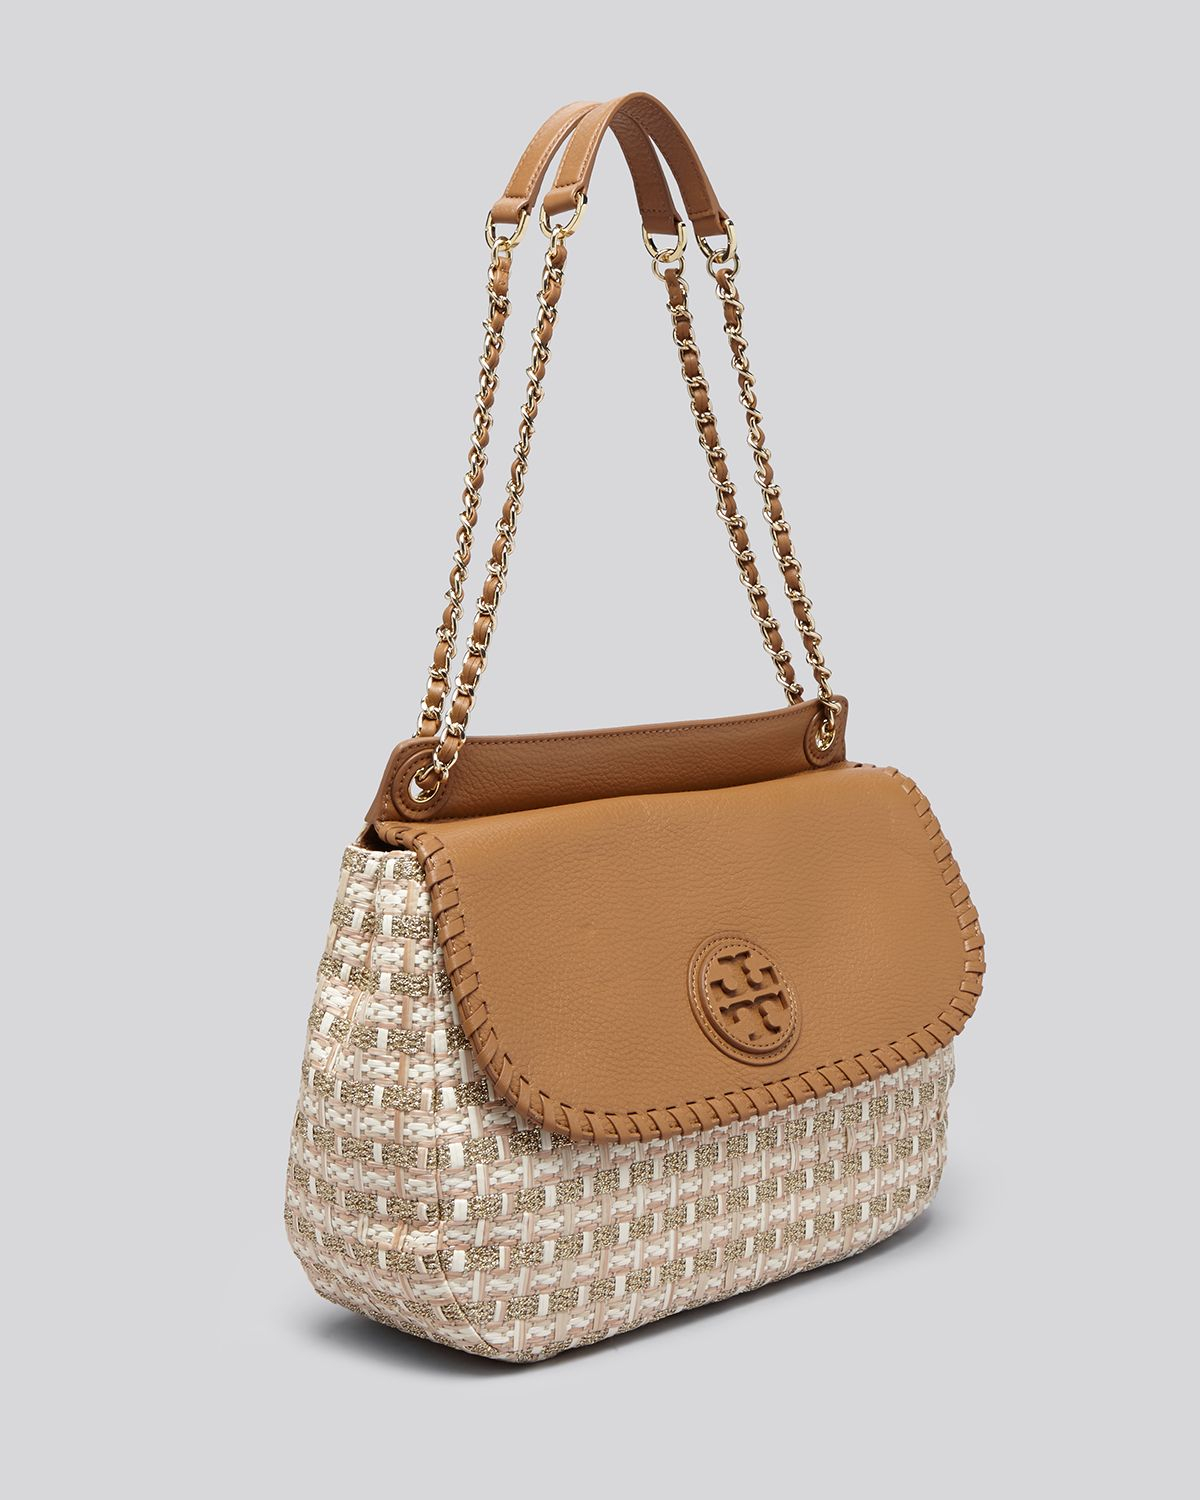 Lyst - Tory Burch Shoulder Bag - Marion Woven Straw Saddle in Metallic